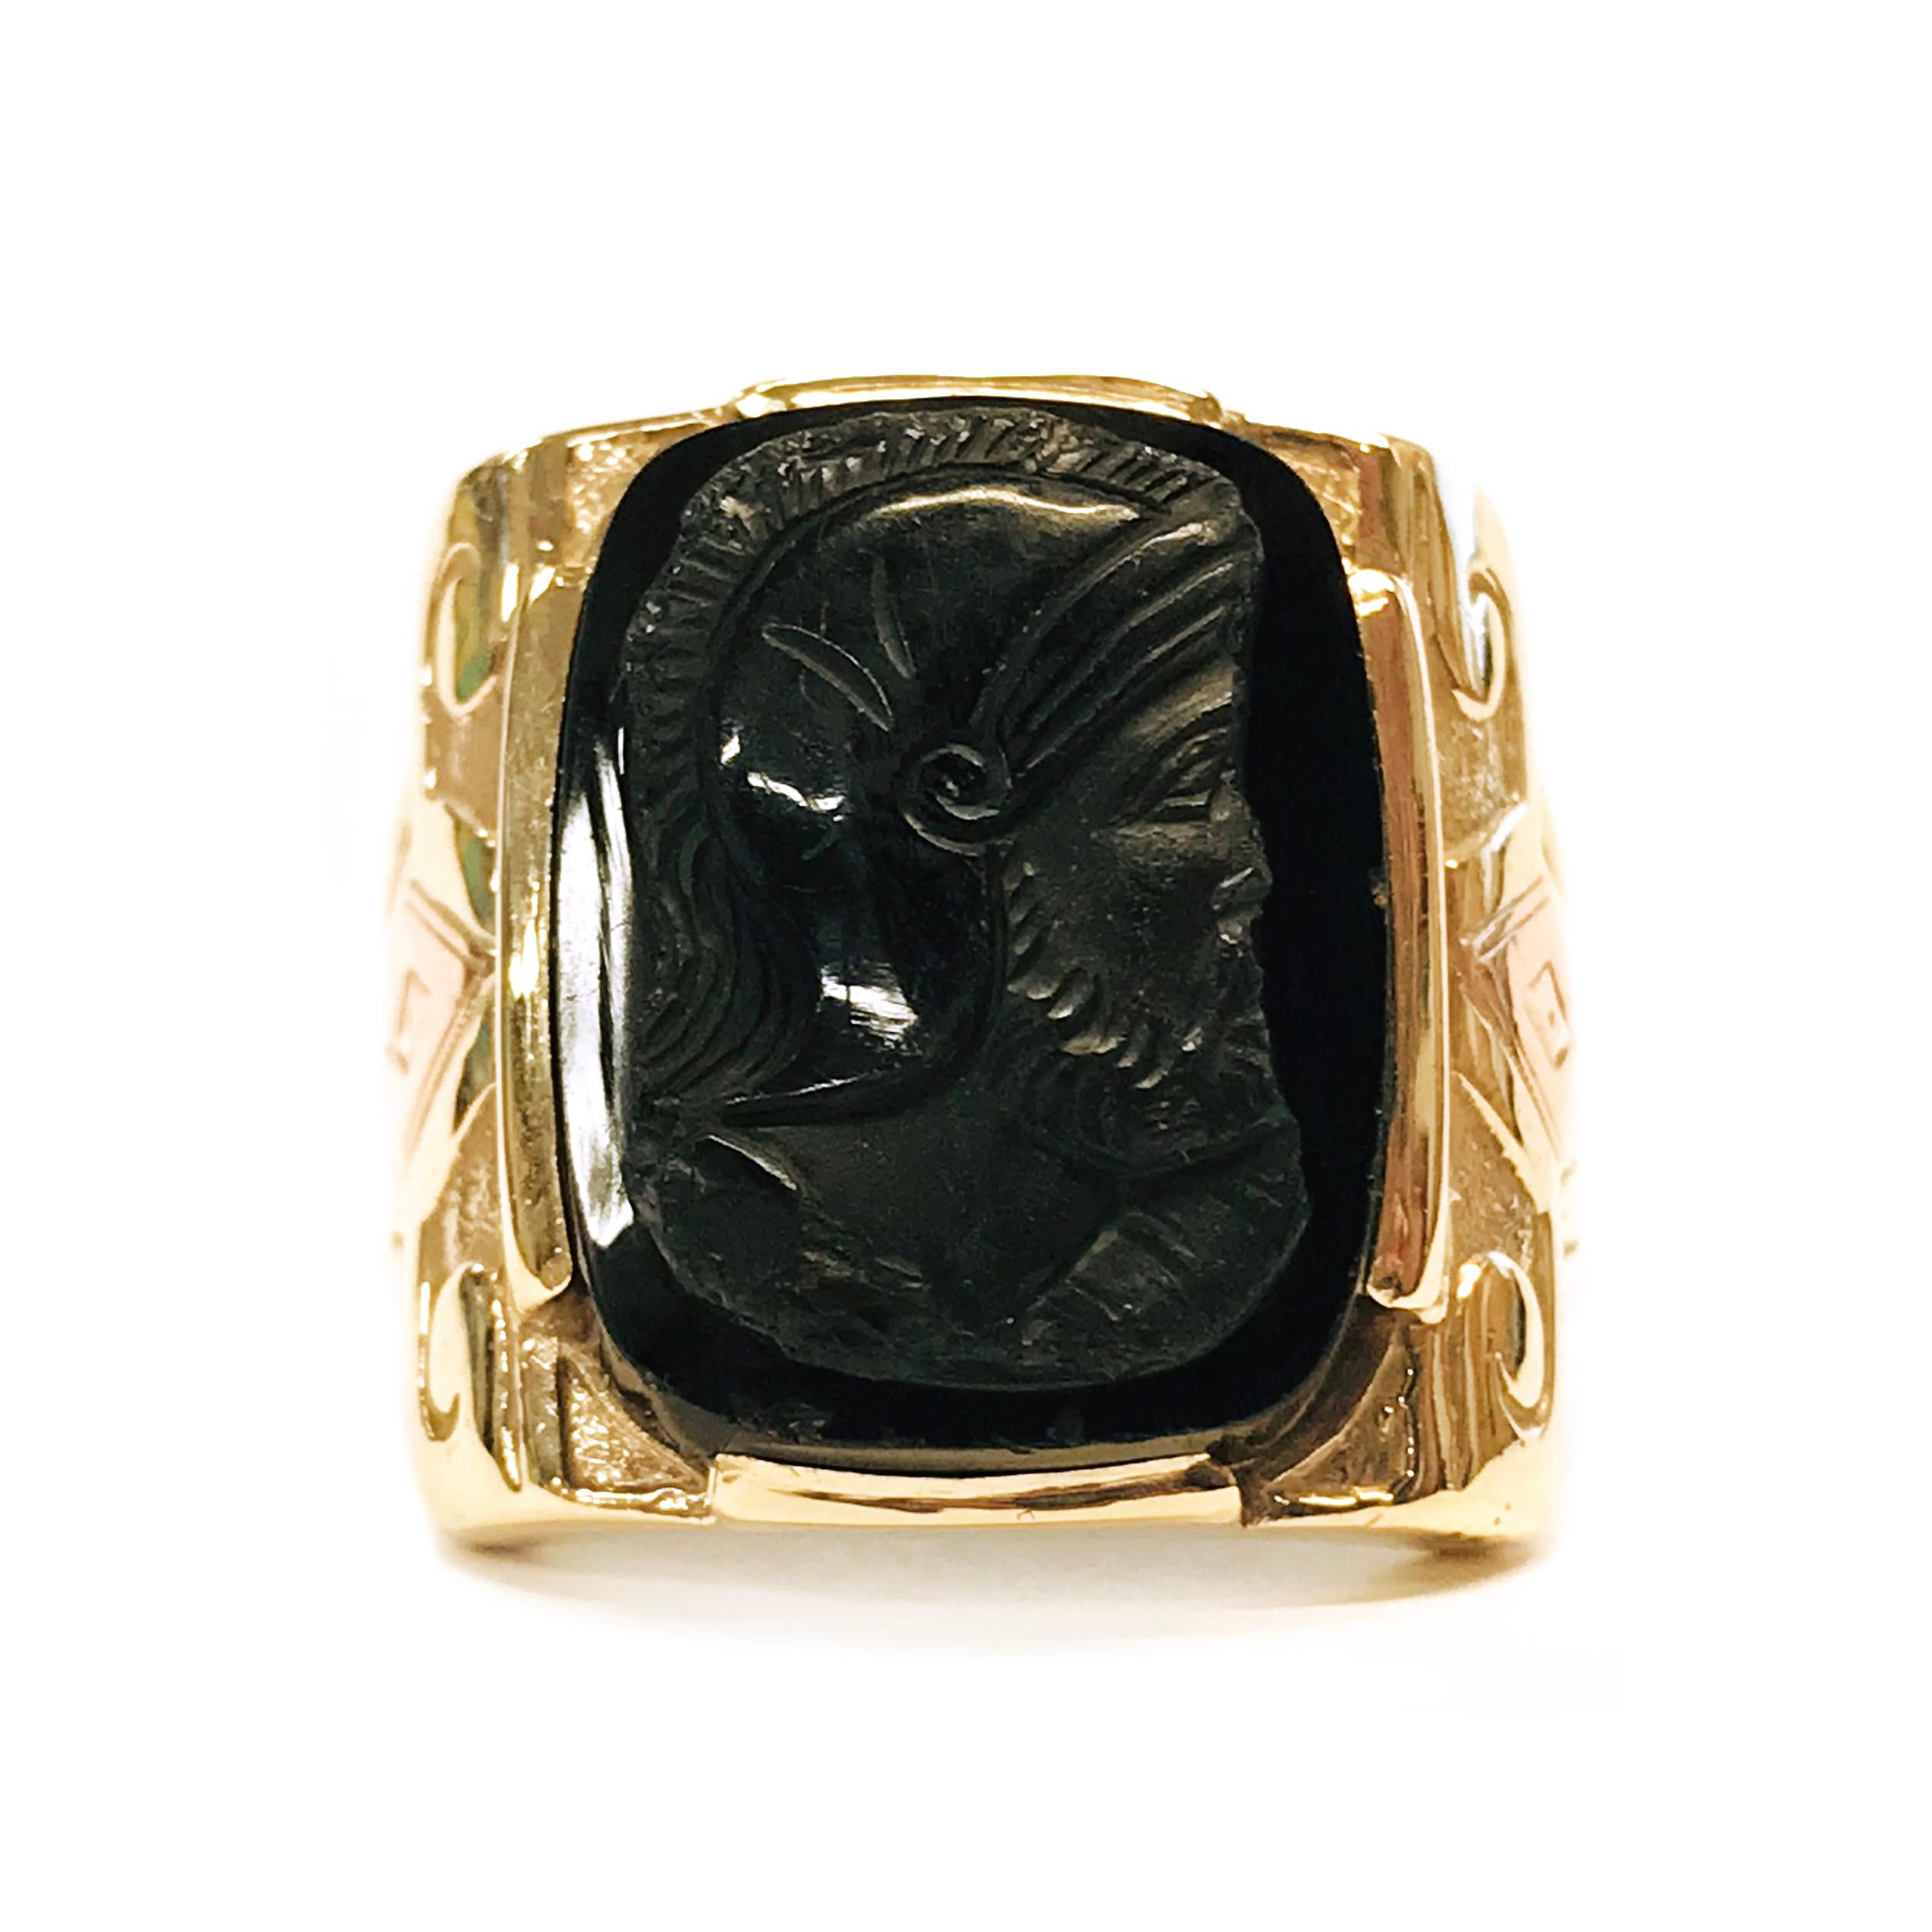 10 Karat Art Deco Intaglio Ring. The wideband has an Art Deco motif and the band tapers. The center of the ring is 19.5mm x 14.7mm Onyx Intaglio of a Roman soldier. Stamped on the inside of the band is 10K. The ring size is 9 3/4. The total gold